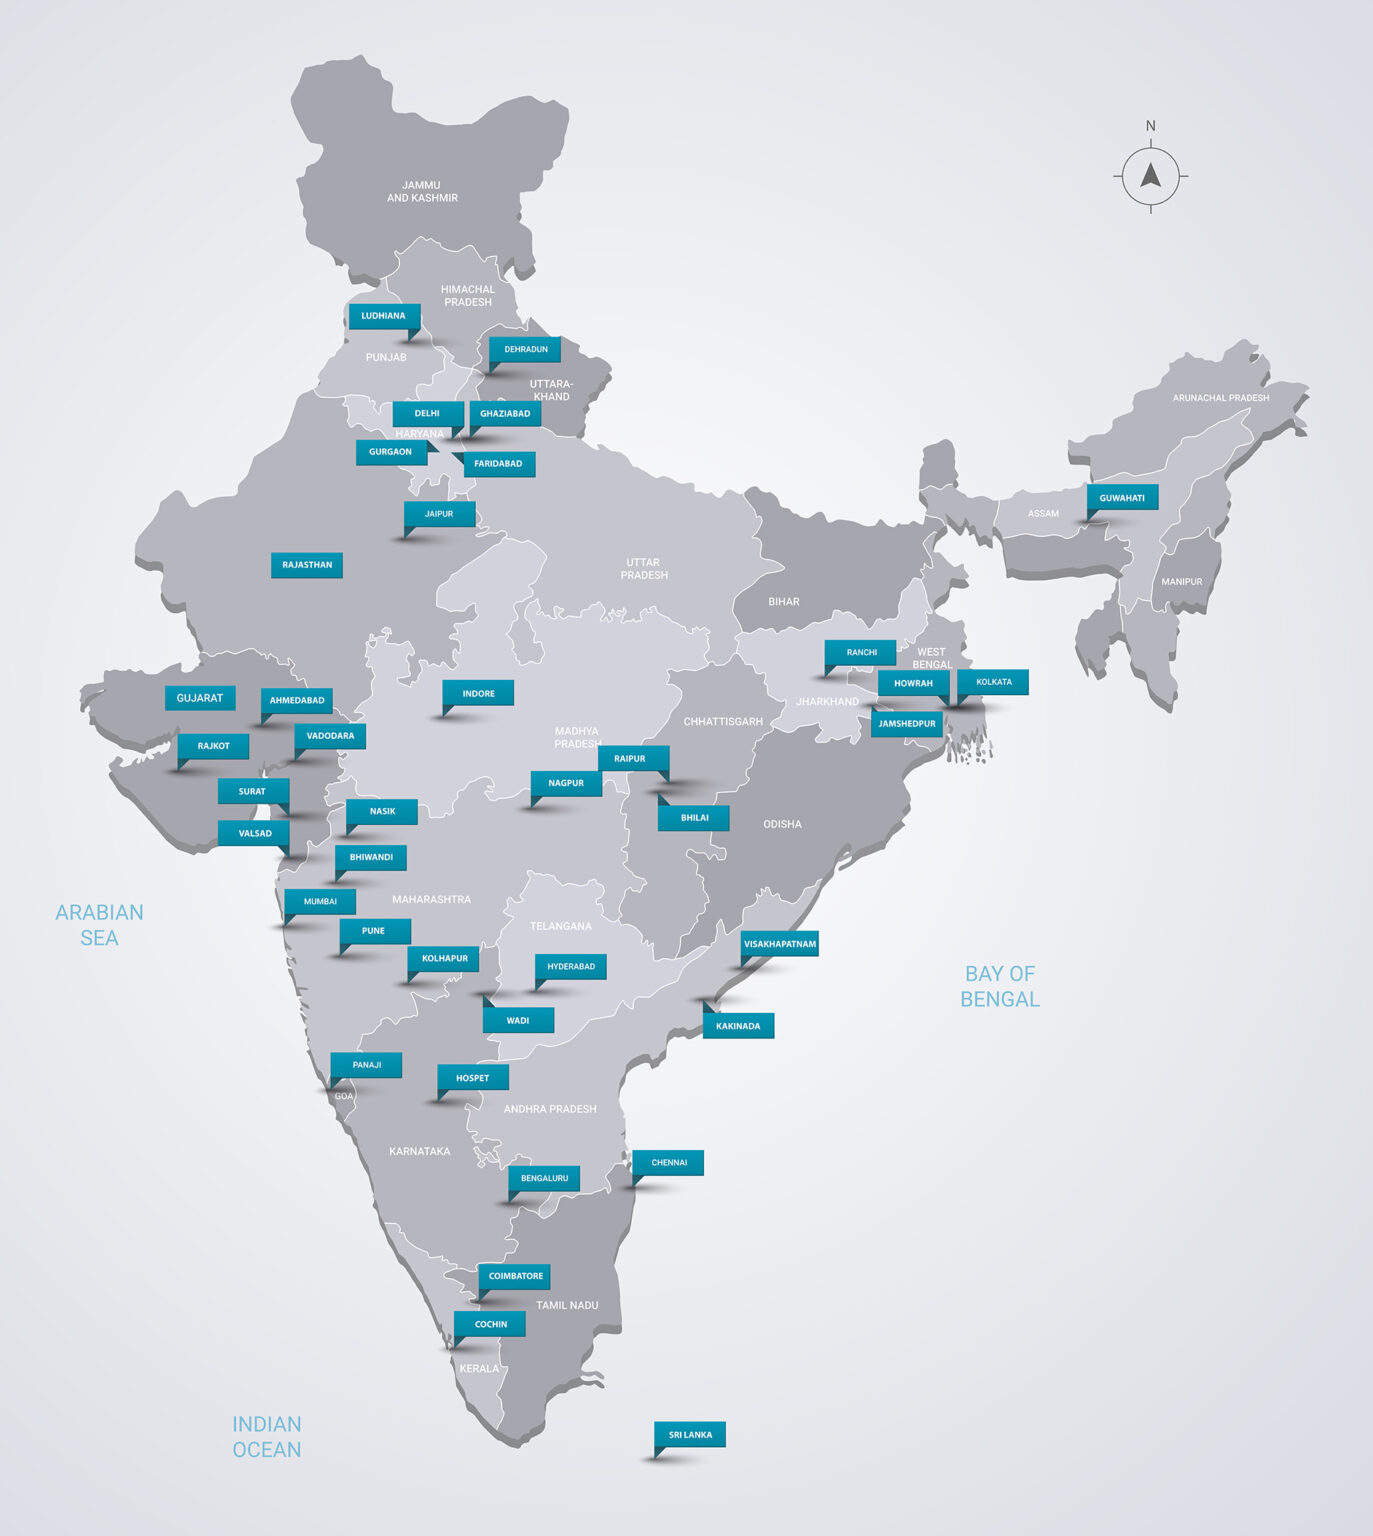 India vector map with infographic elements, pointer marks. Editable template with regions, cities and capital Delhi.